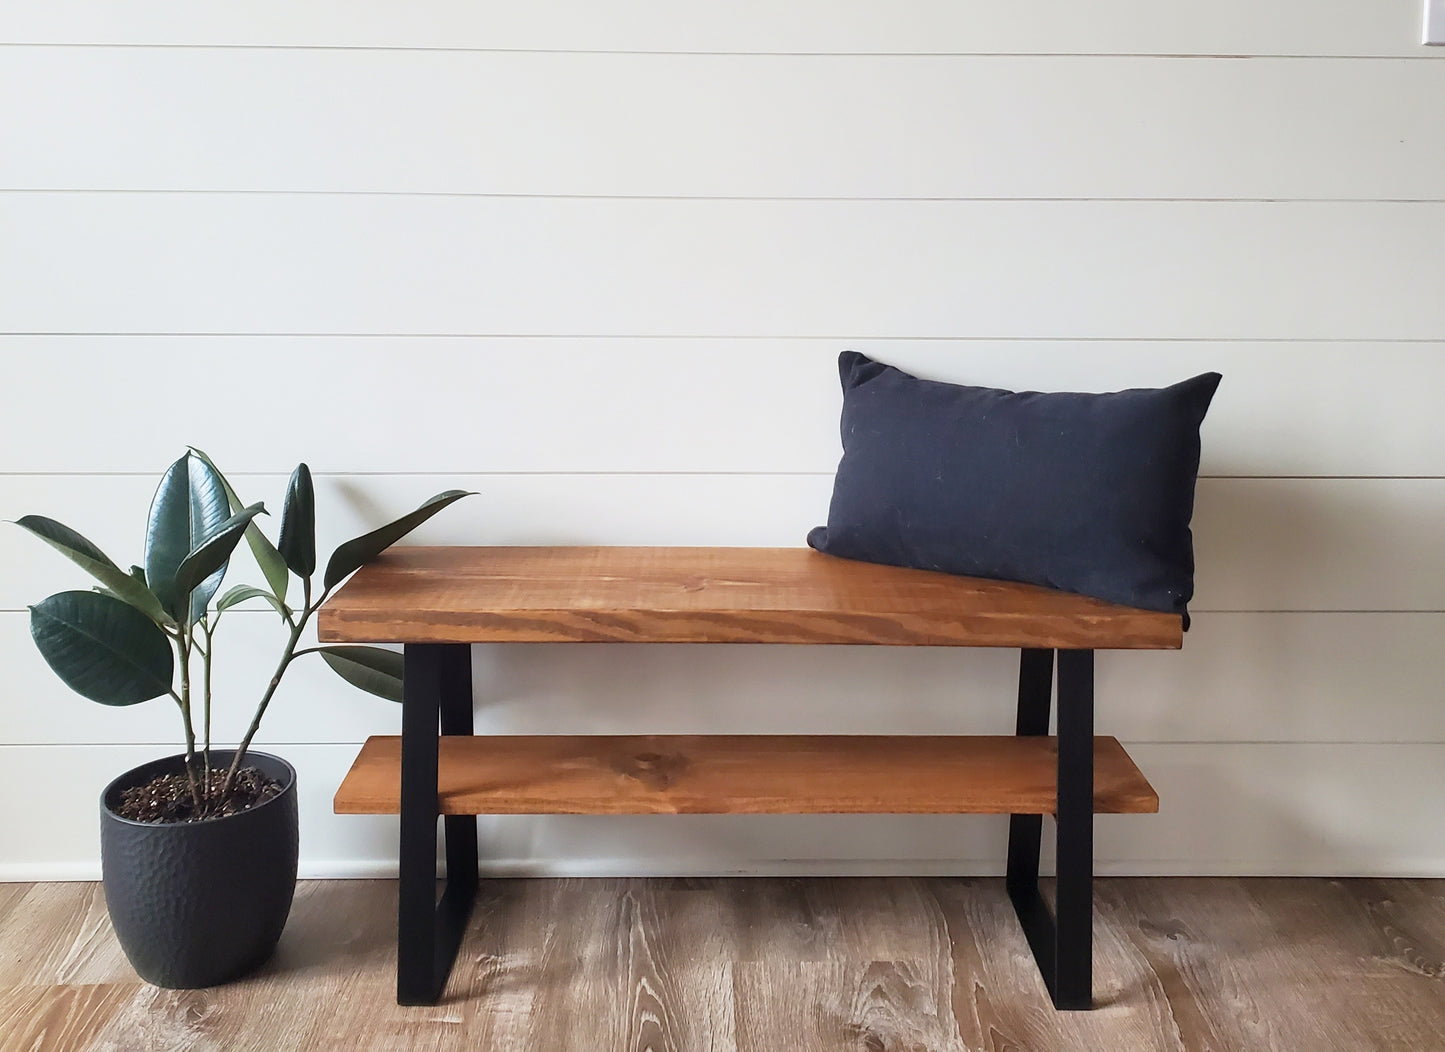 Farmhouse Rustic Bench With Shelf